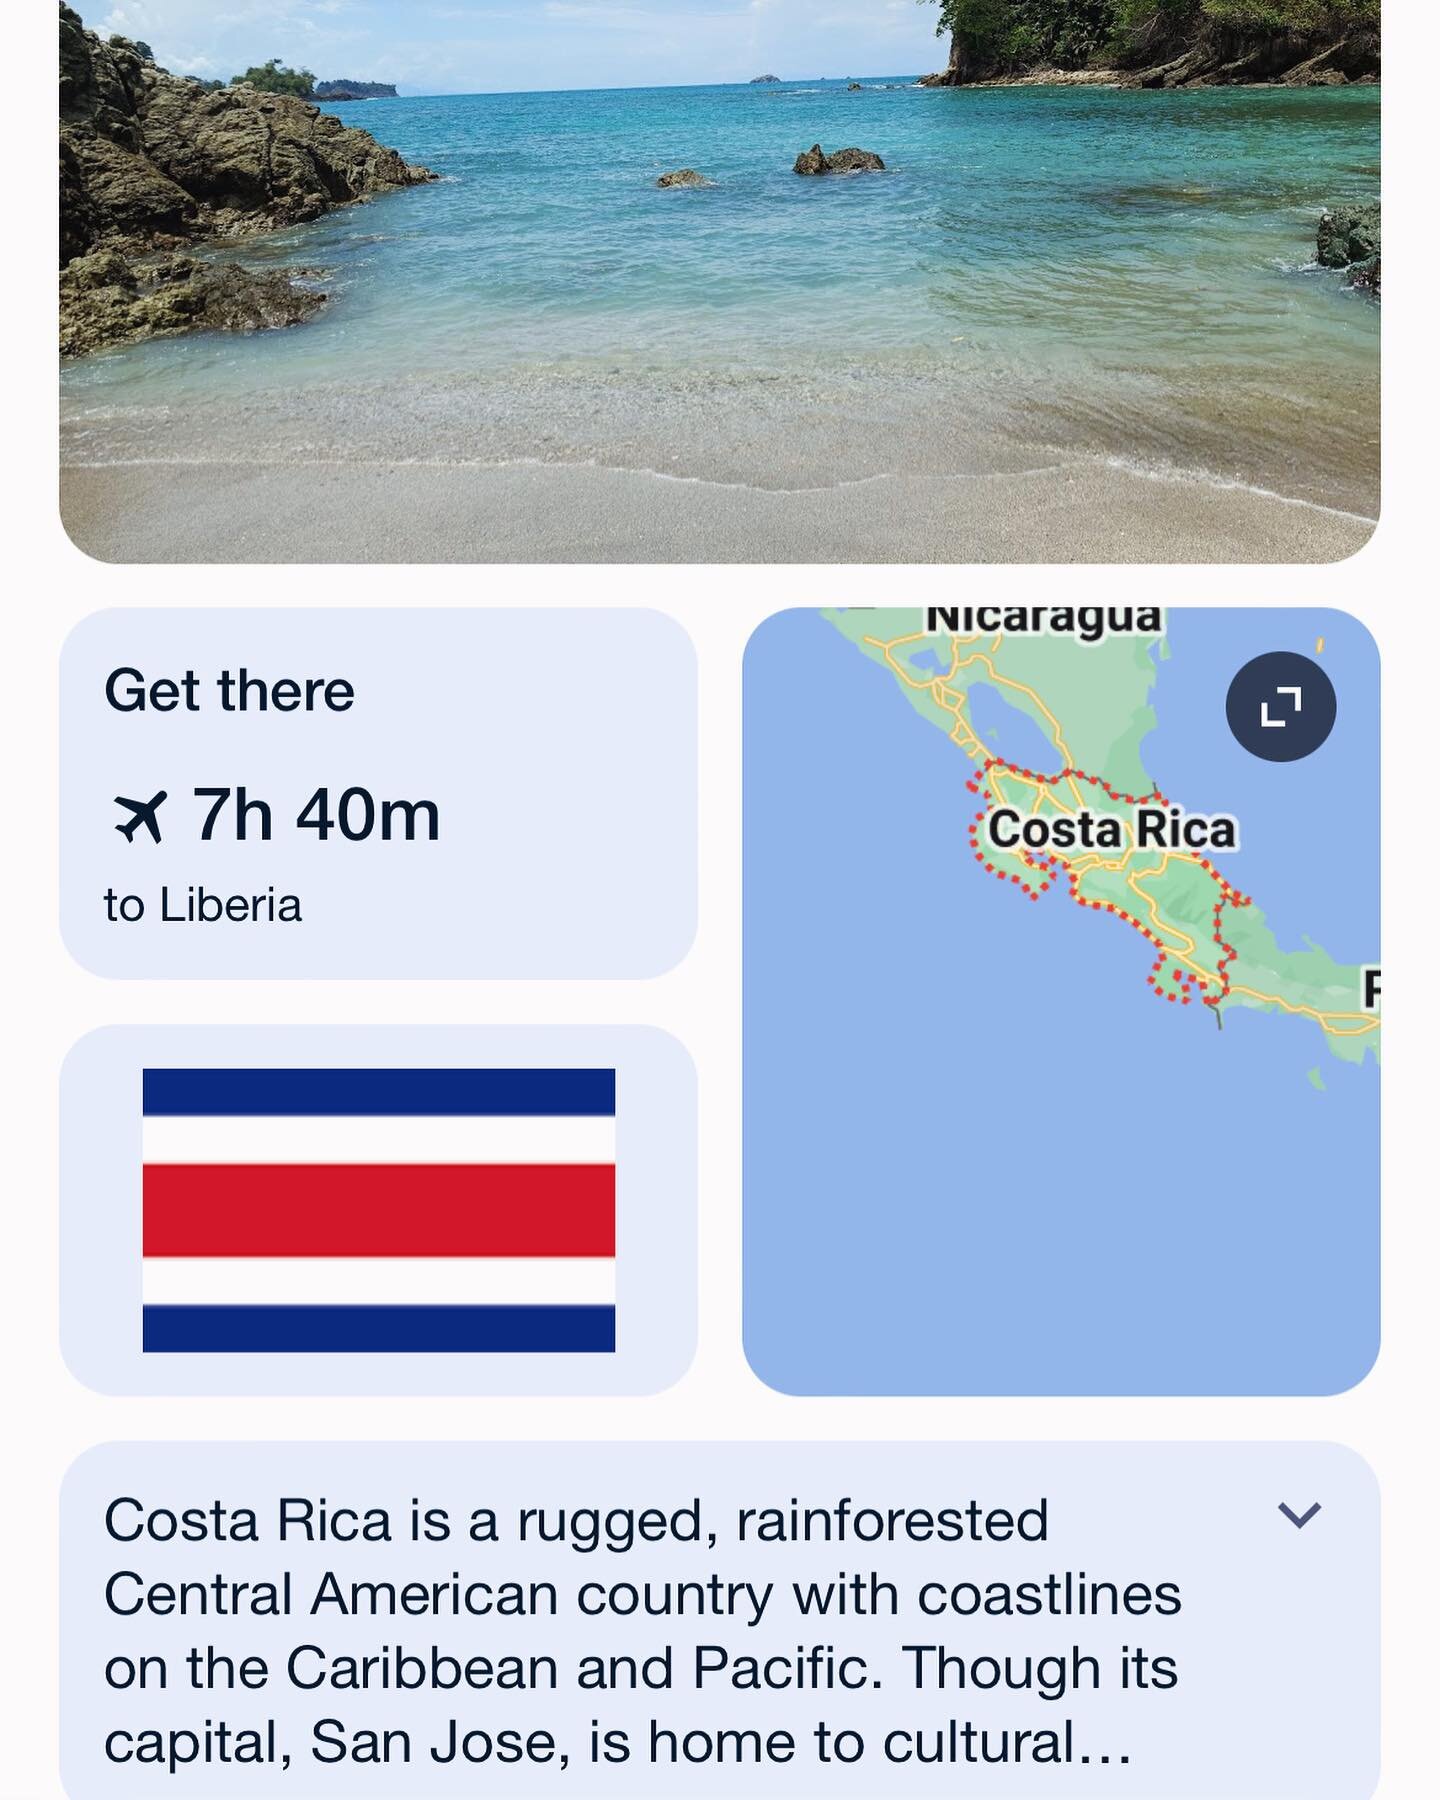 Next stop on our travels? Costa Rica! Looking forward to visiting @costaricarecovery @newsummitacademy @pathfinder_cr @thebridgecr and @purelifeadventure 

Joint work trip for @sarahgmulrooney and I and we&rsquo;re looking forward to getting to know 